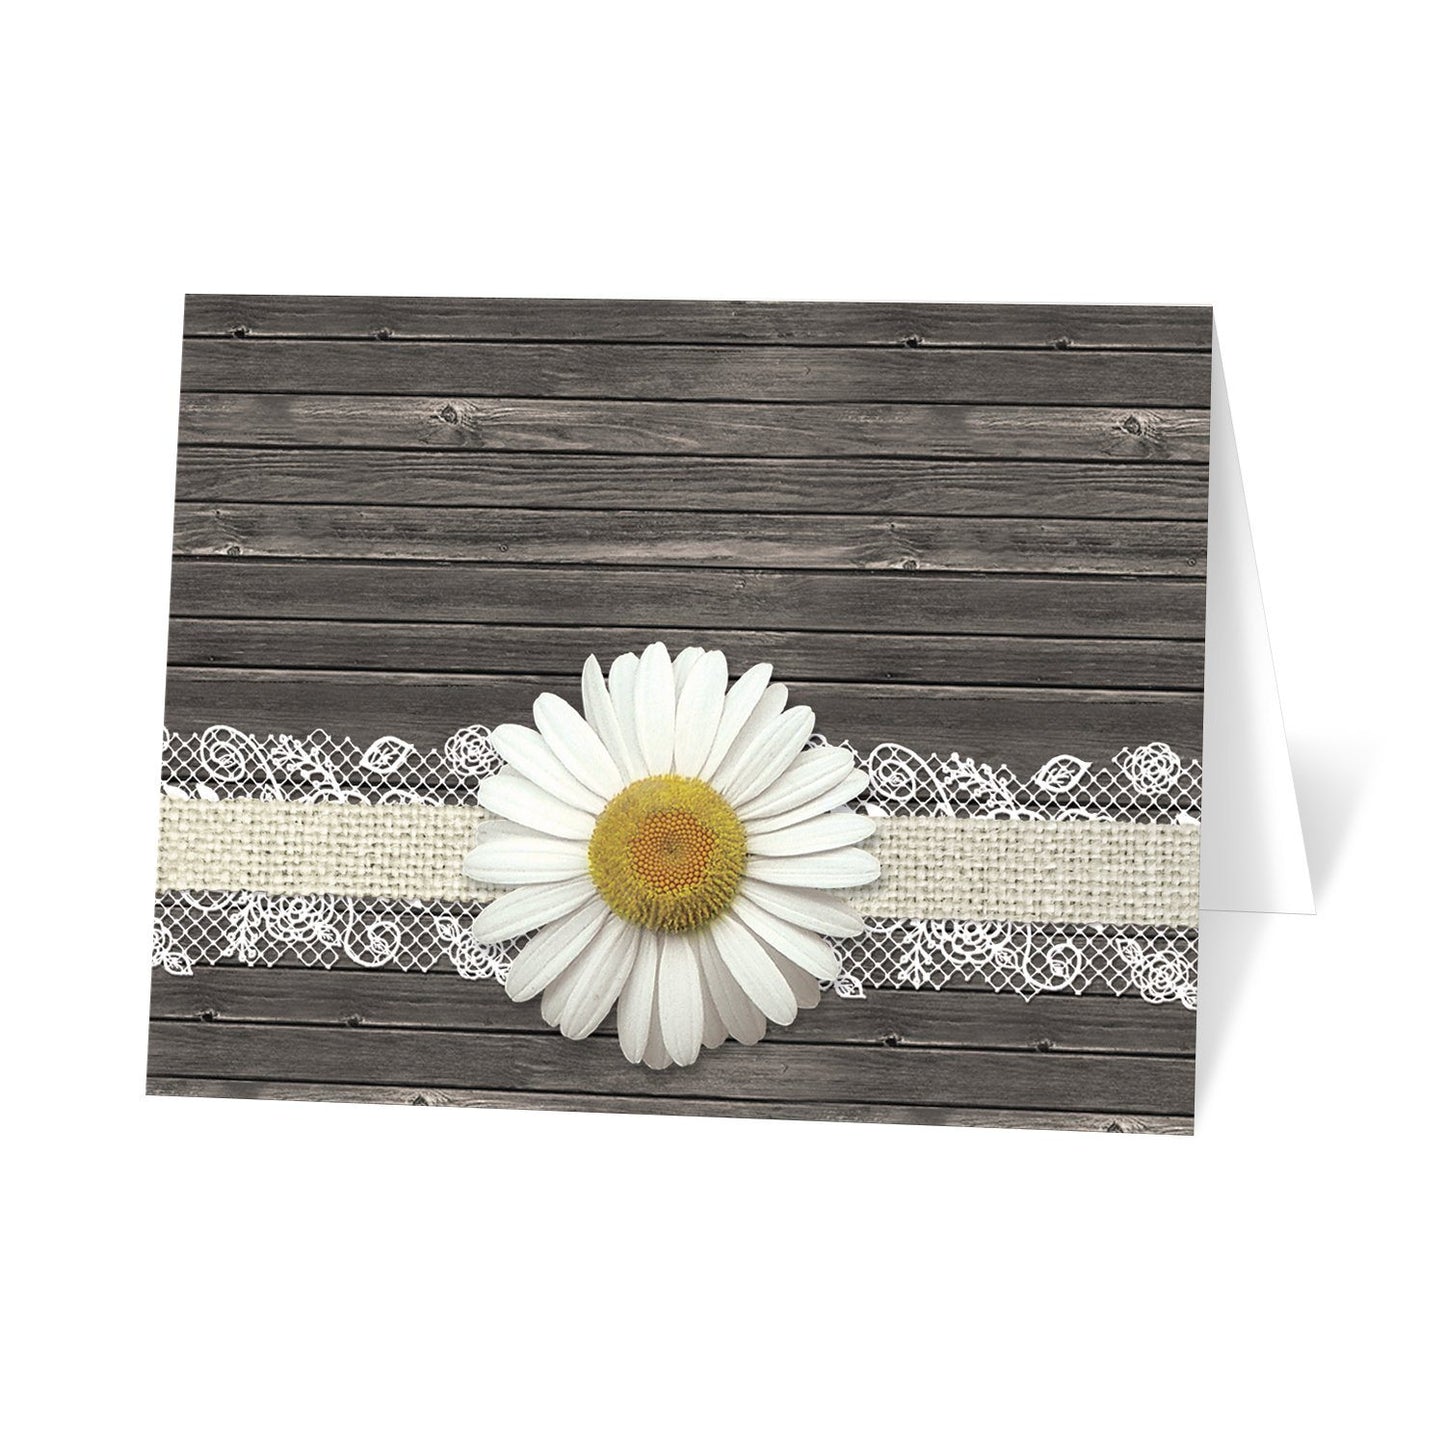 Daisy Burlap and Lace Wood Note Cards at Artistically Invited - Daisy Thank You Cards